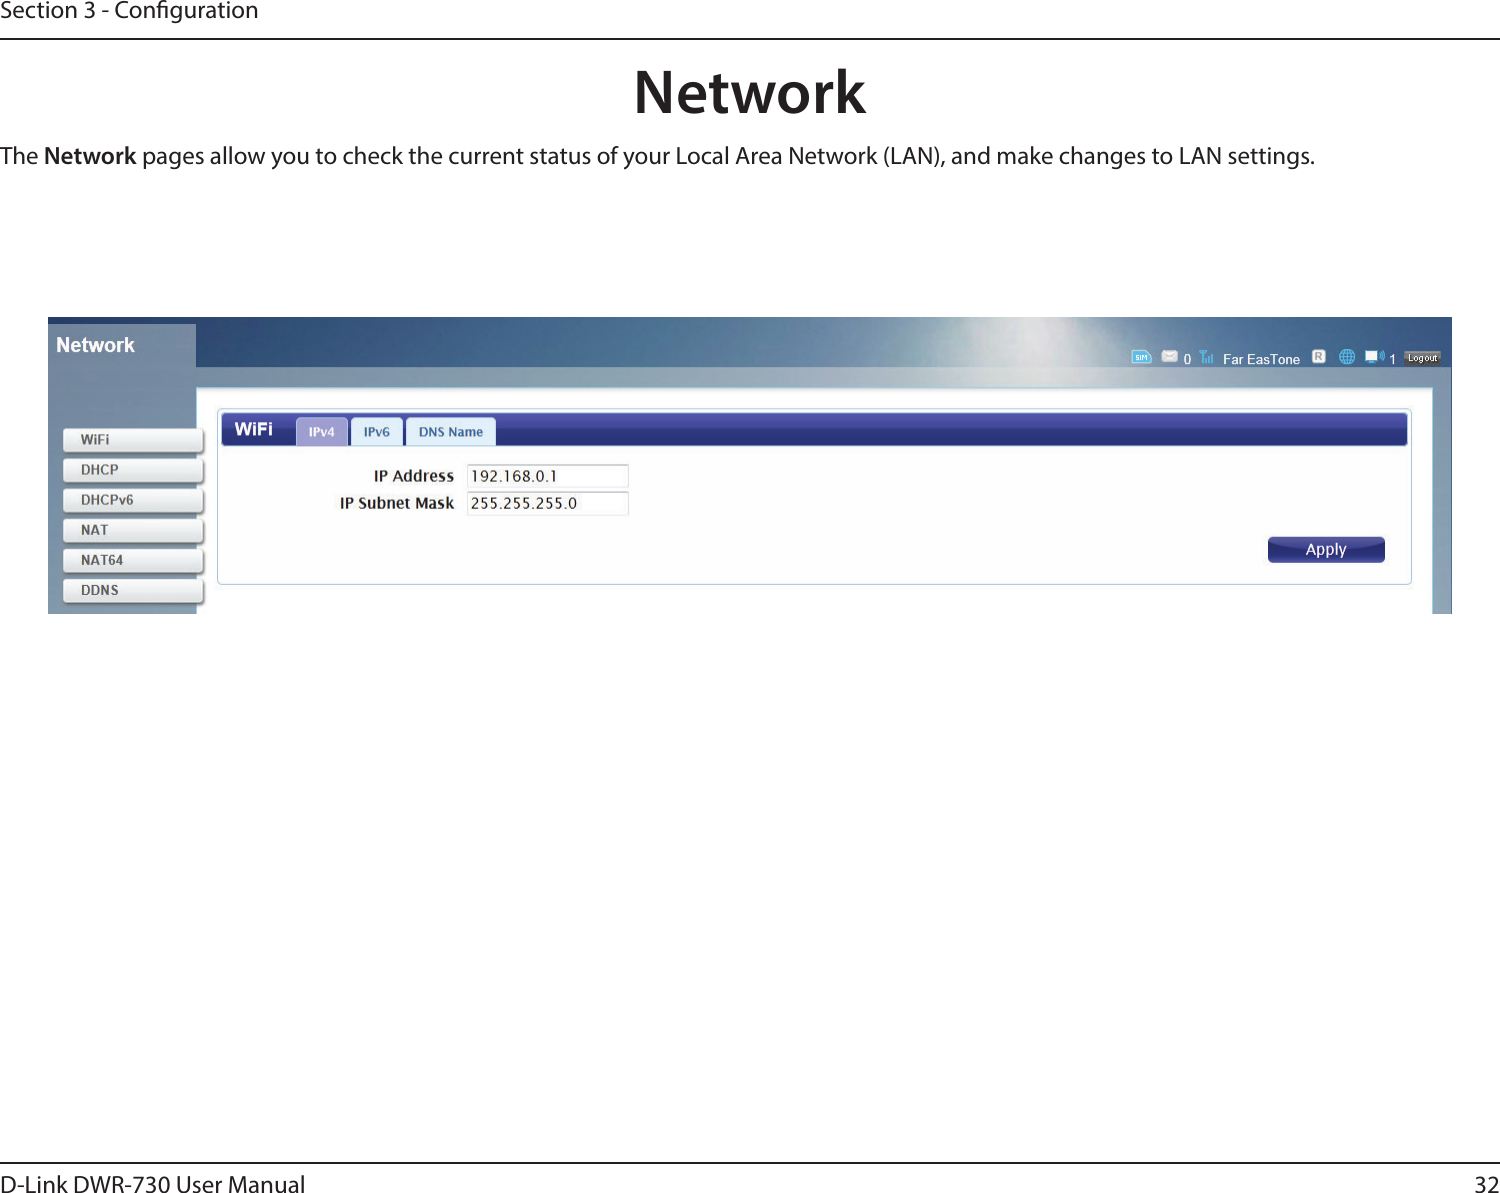 32D-Link DWR-730 User ManualSection 3 - CongurationNetworkThe Network pages allow you to check the current status of your Local Area Network (LAN), and make changes to LAN settings.